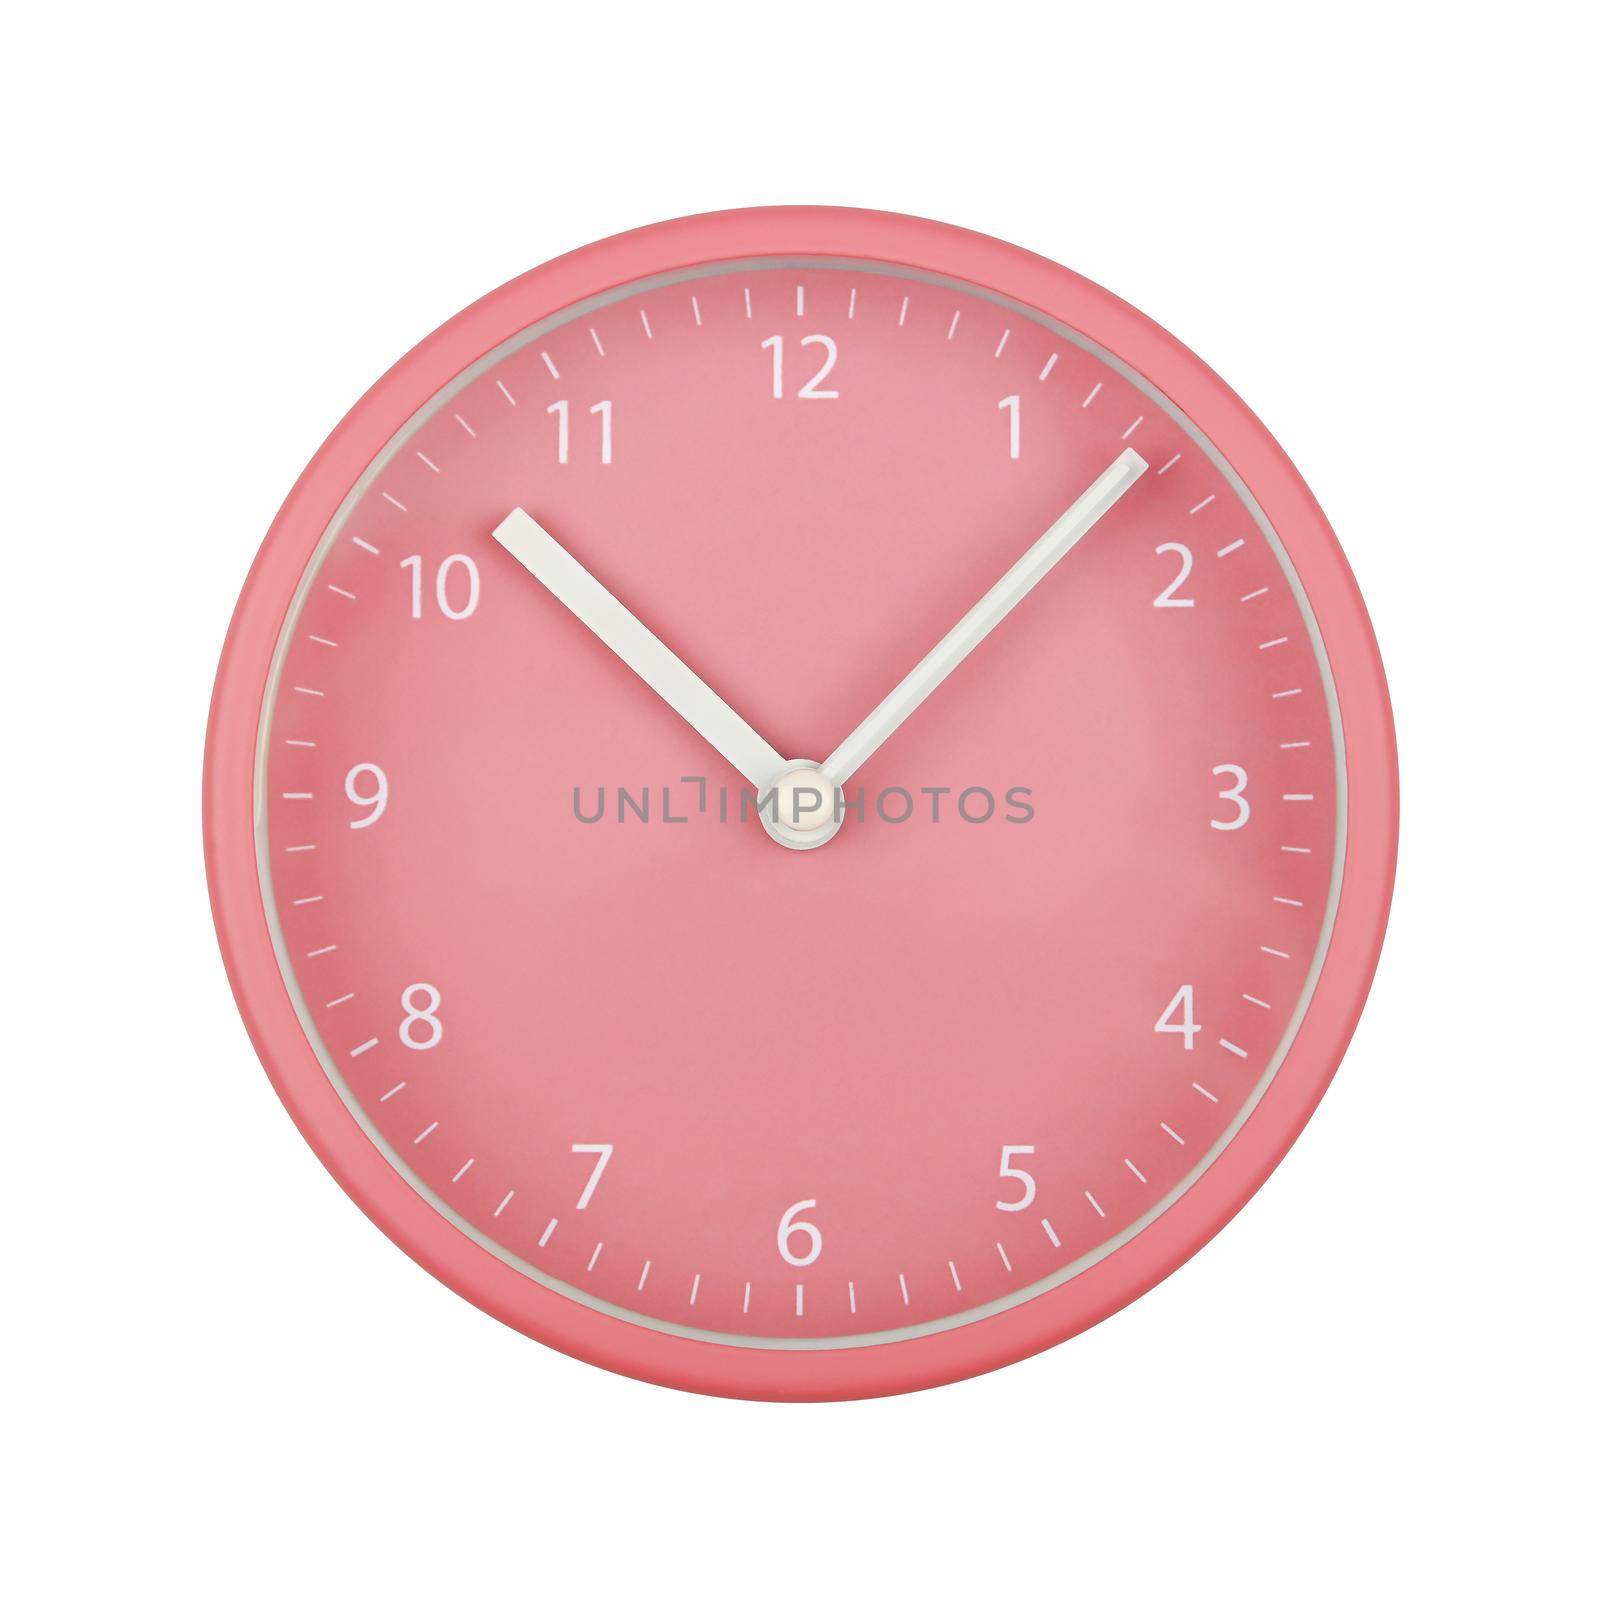 Close up pastel pink wall clock face dial with Arabic numerals, hour and minute hands isolated on white background